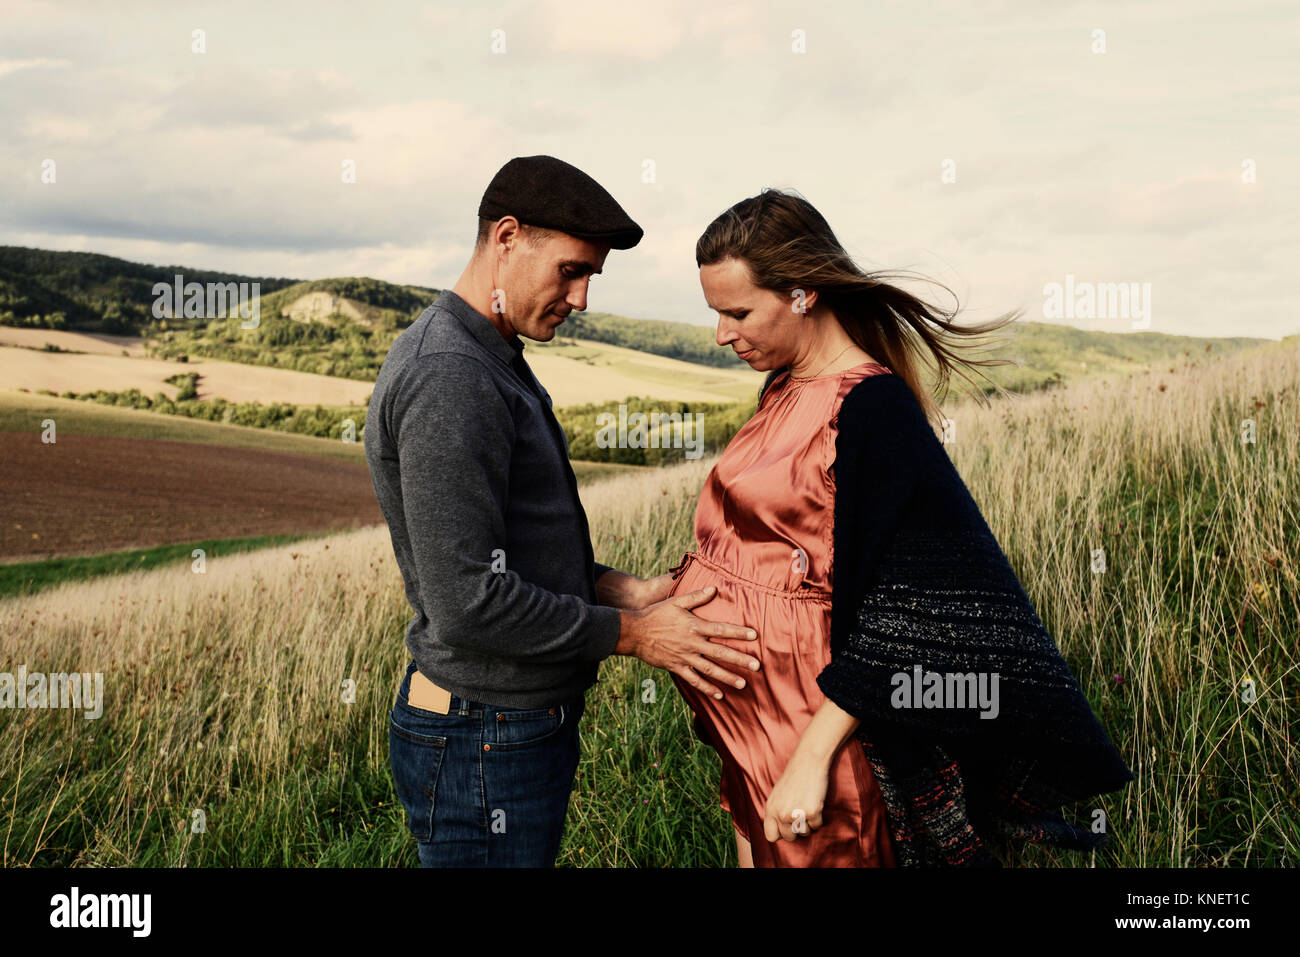 Romantic man with hands on pregnant wife's stomach on hillside Stock Photo